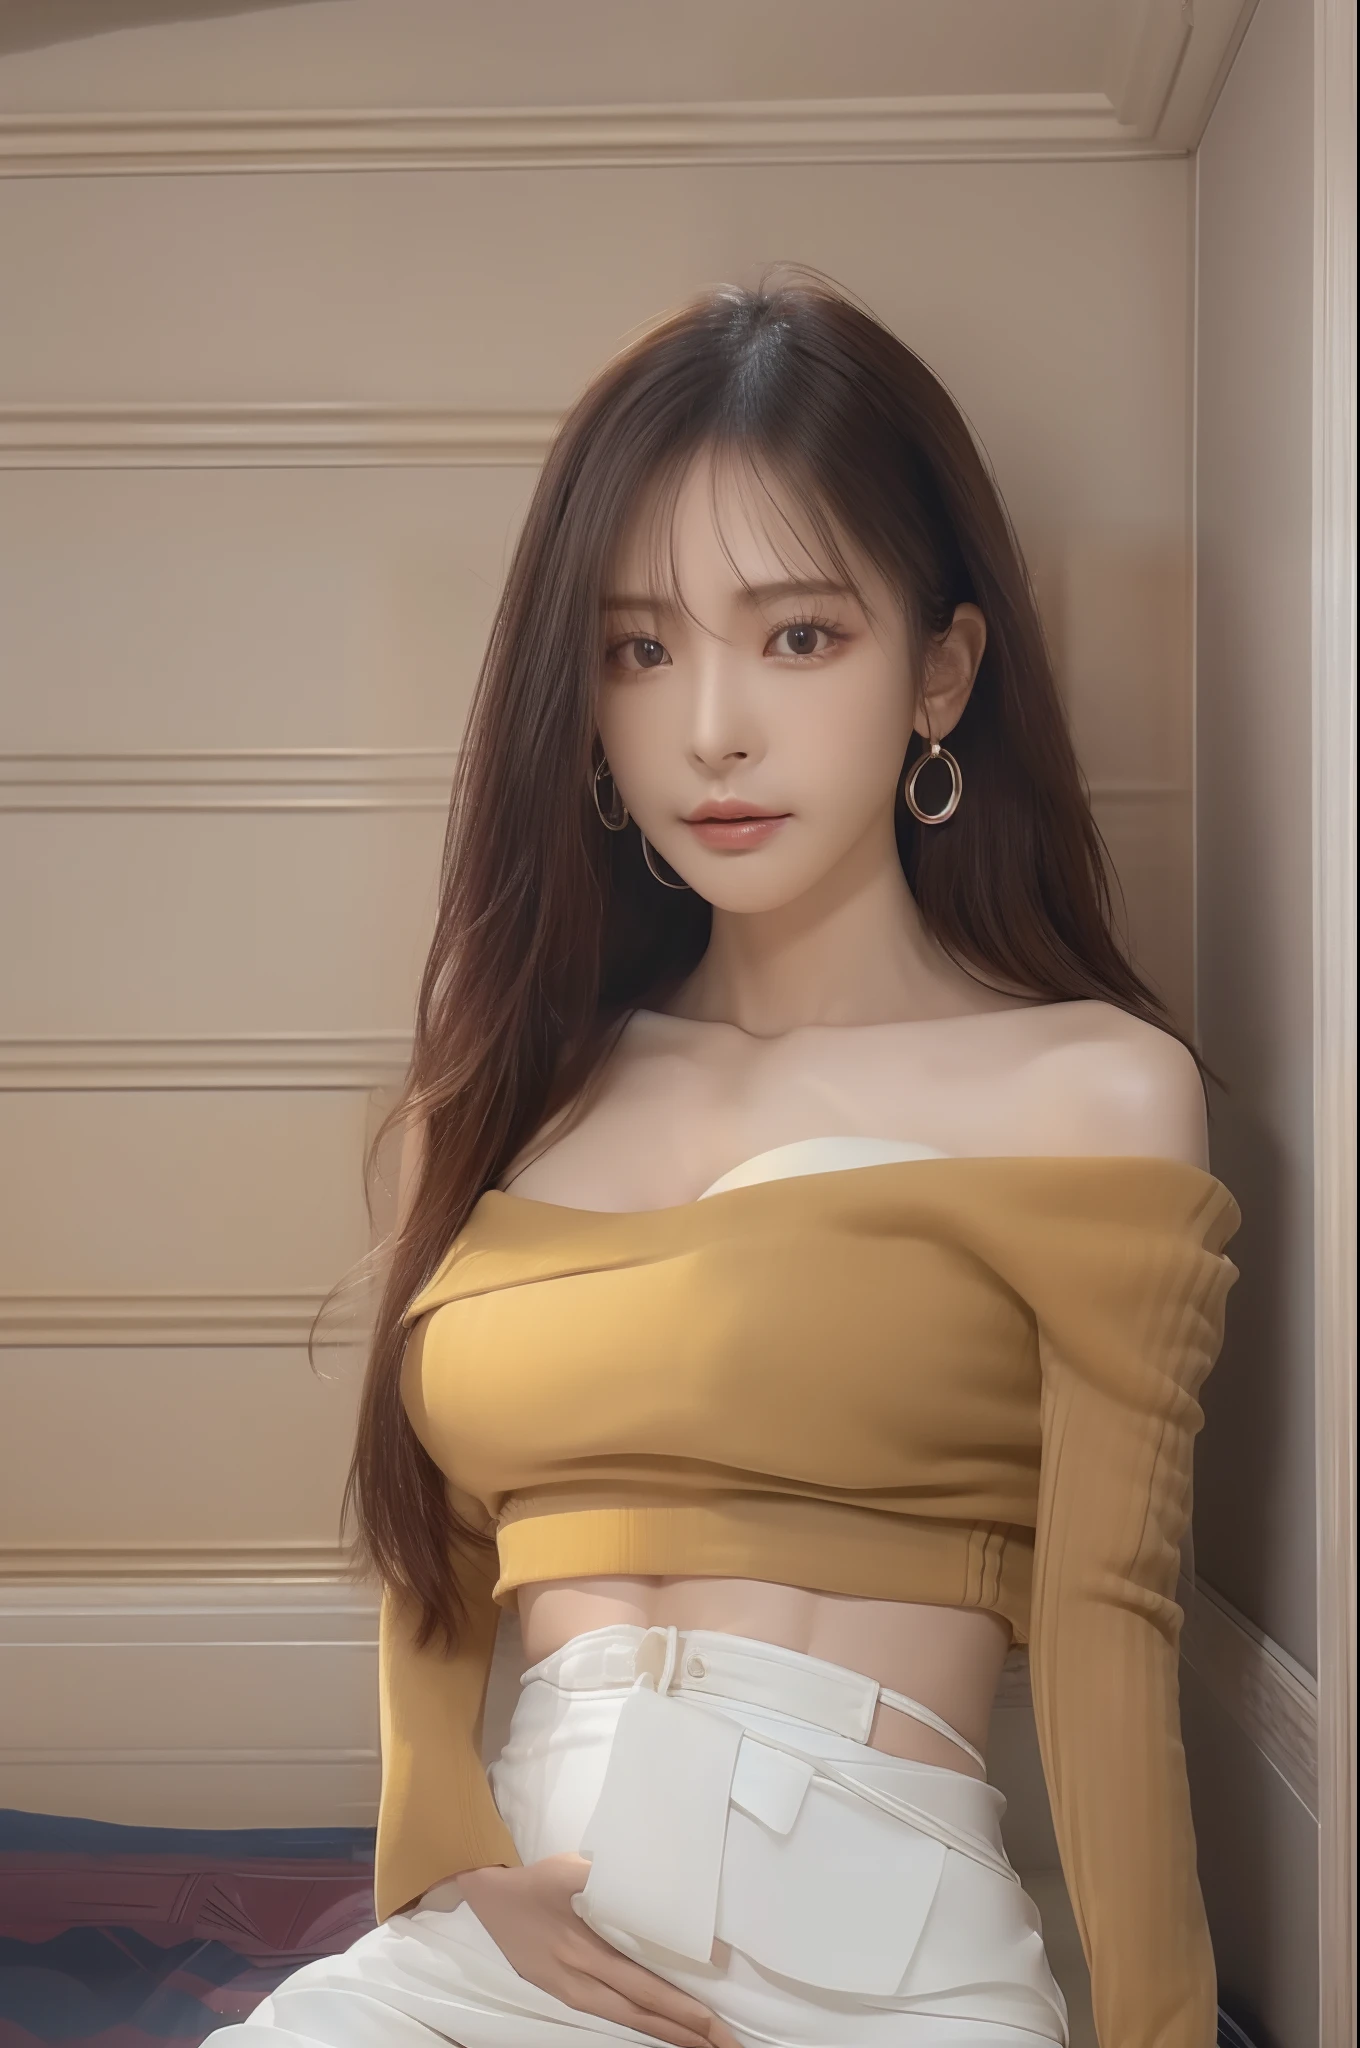 NSFW，best qualtiy，tmasterpiece，Ultra-high resolution，(Photoreal:1.3)，8K，RAW photos，1girll，exteriors，Balenciaga models， (off-shoulder sweater, Crop tops, long-sleeves sweater), wearing a white skirt，gigantic cleavage breasts，full bodyesbian，Photoshop，Fashionab，minimalistic background，Natural skin texture，Playboy model，Natural skin texture，dynamicposes，filmgrain，Expose cleavage，revealing breasts，full bodyesbian，looks into camera，Full body photo